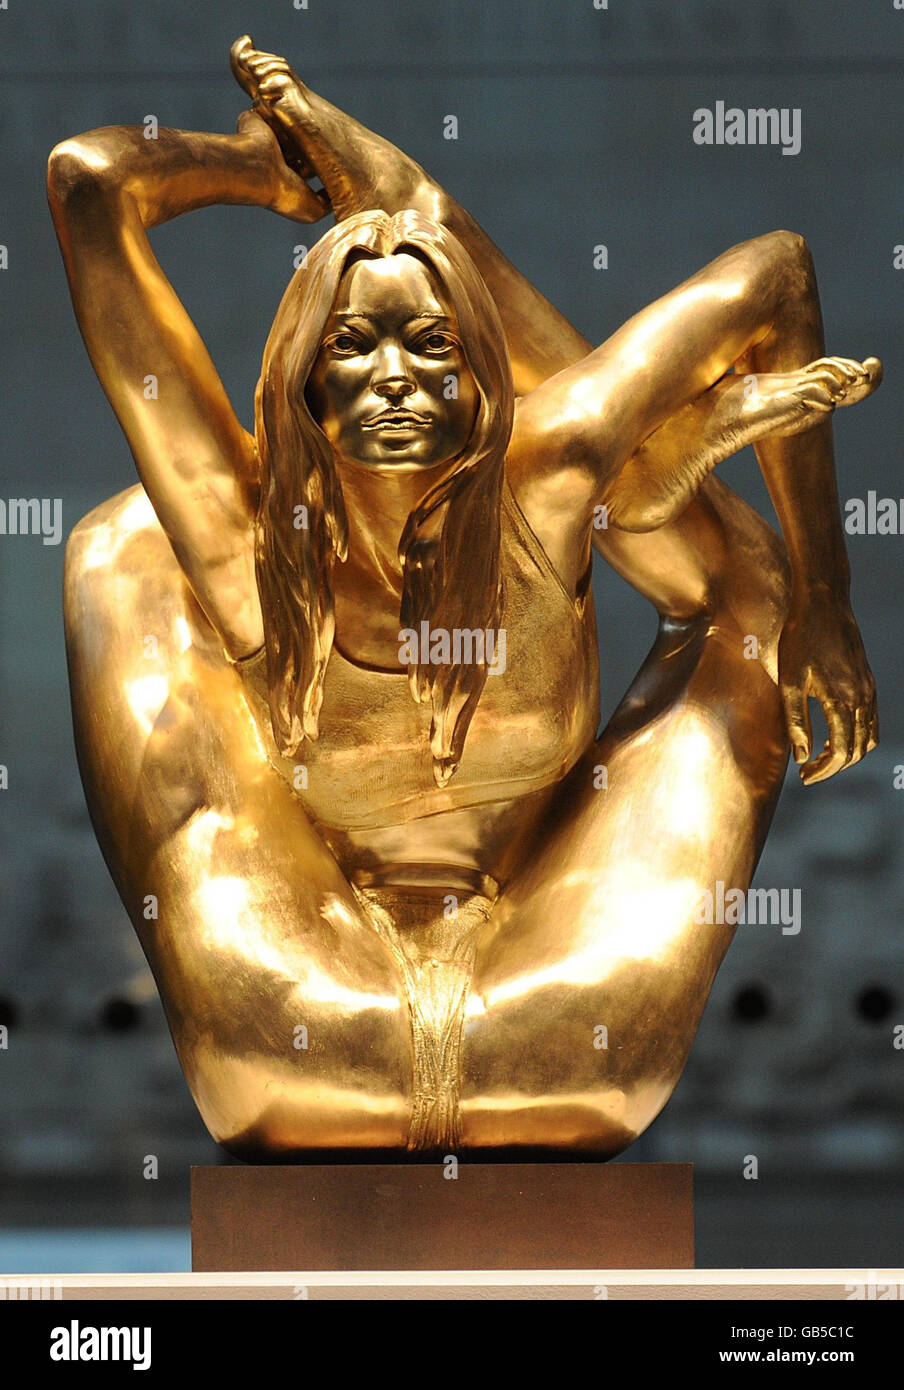 Solid gold Kate Moss statue unveiled Stock Photo